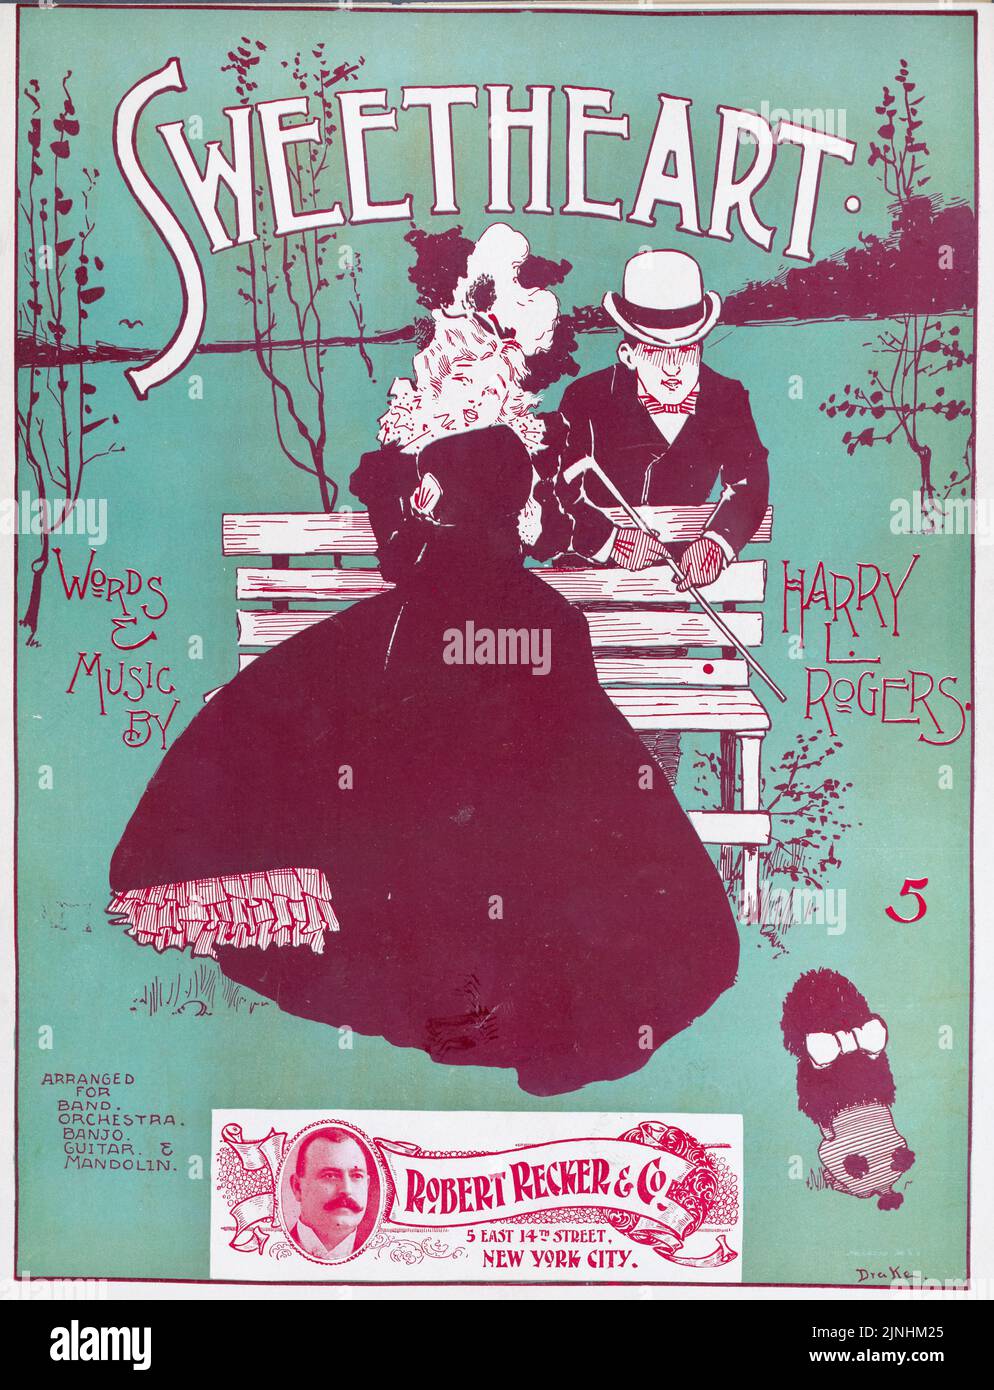 Sweetheart (1899) Words and Music by Harry L. Rogers, Published by Robert Recker and Company. Sheet music cover. Illustration by Drake Stock Photo